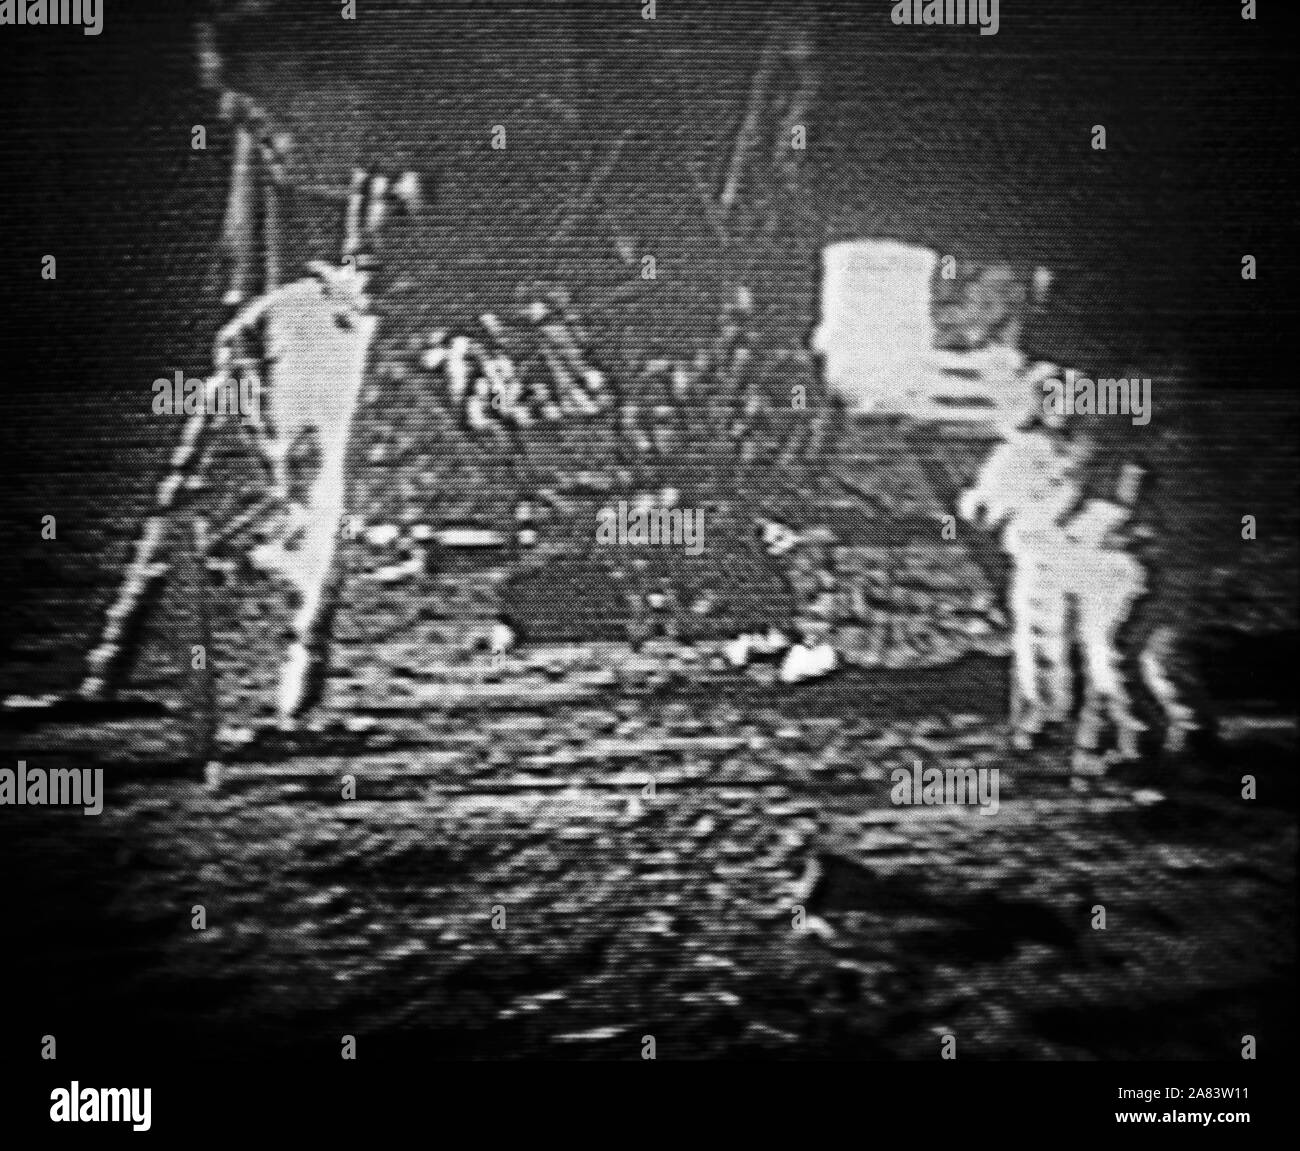 Neil A. Armstrong, commander; and Edwin E. Aldrin Jr., lunar module pilot, commemorate their historical landing and walk on the moon by planting the United States flag on the lunar surface camera Stock Photo